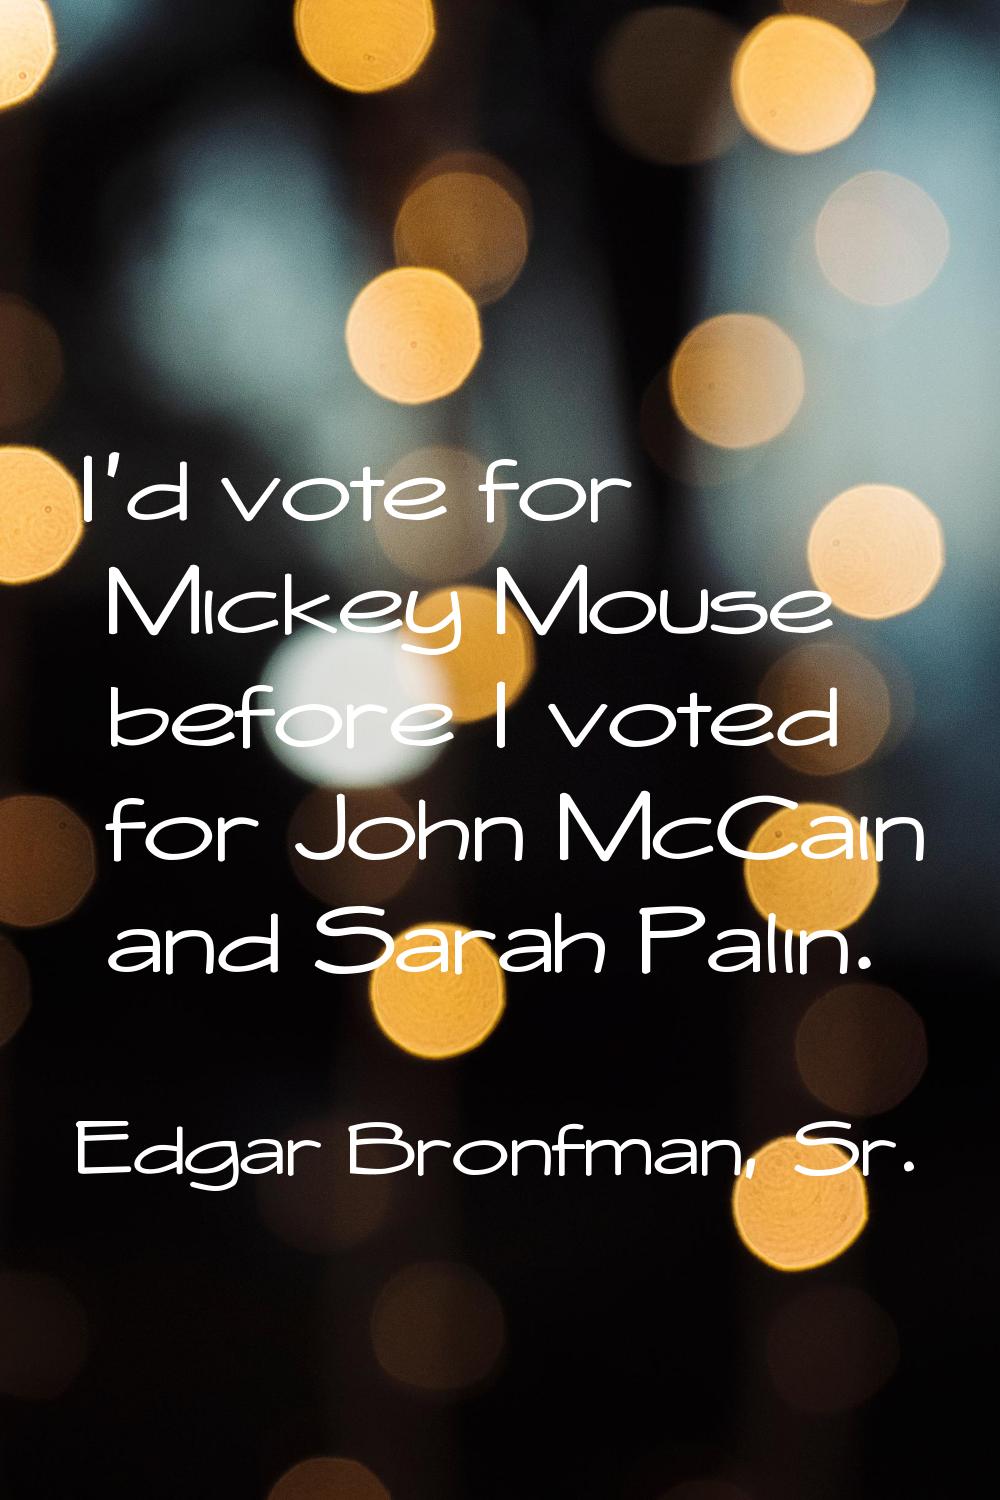 I'd vote for Mickey Mouse before I voted for John McCain and Sarah Palin.